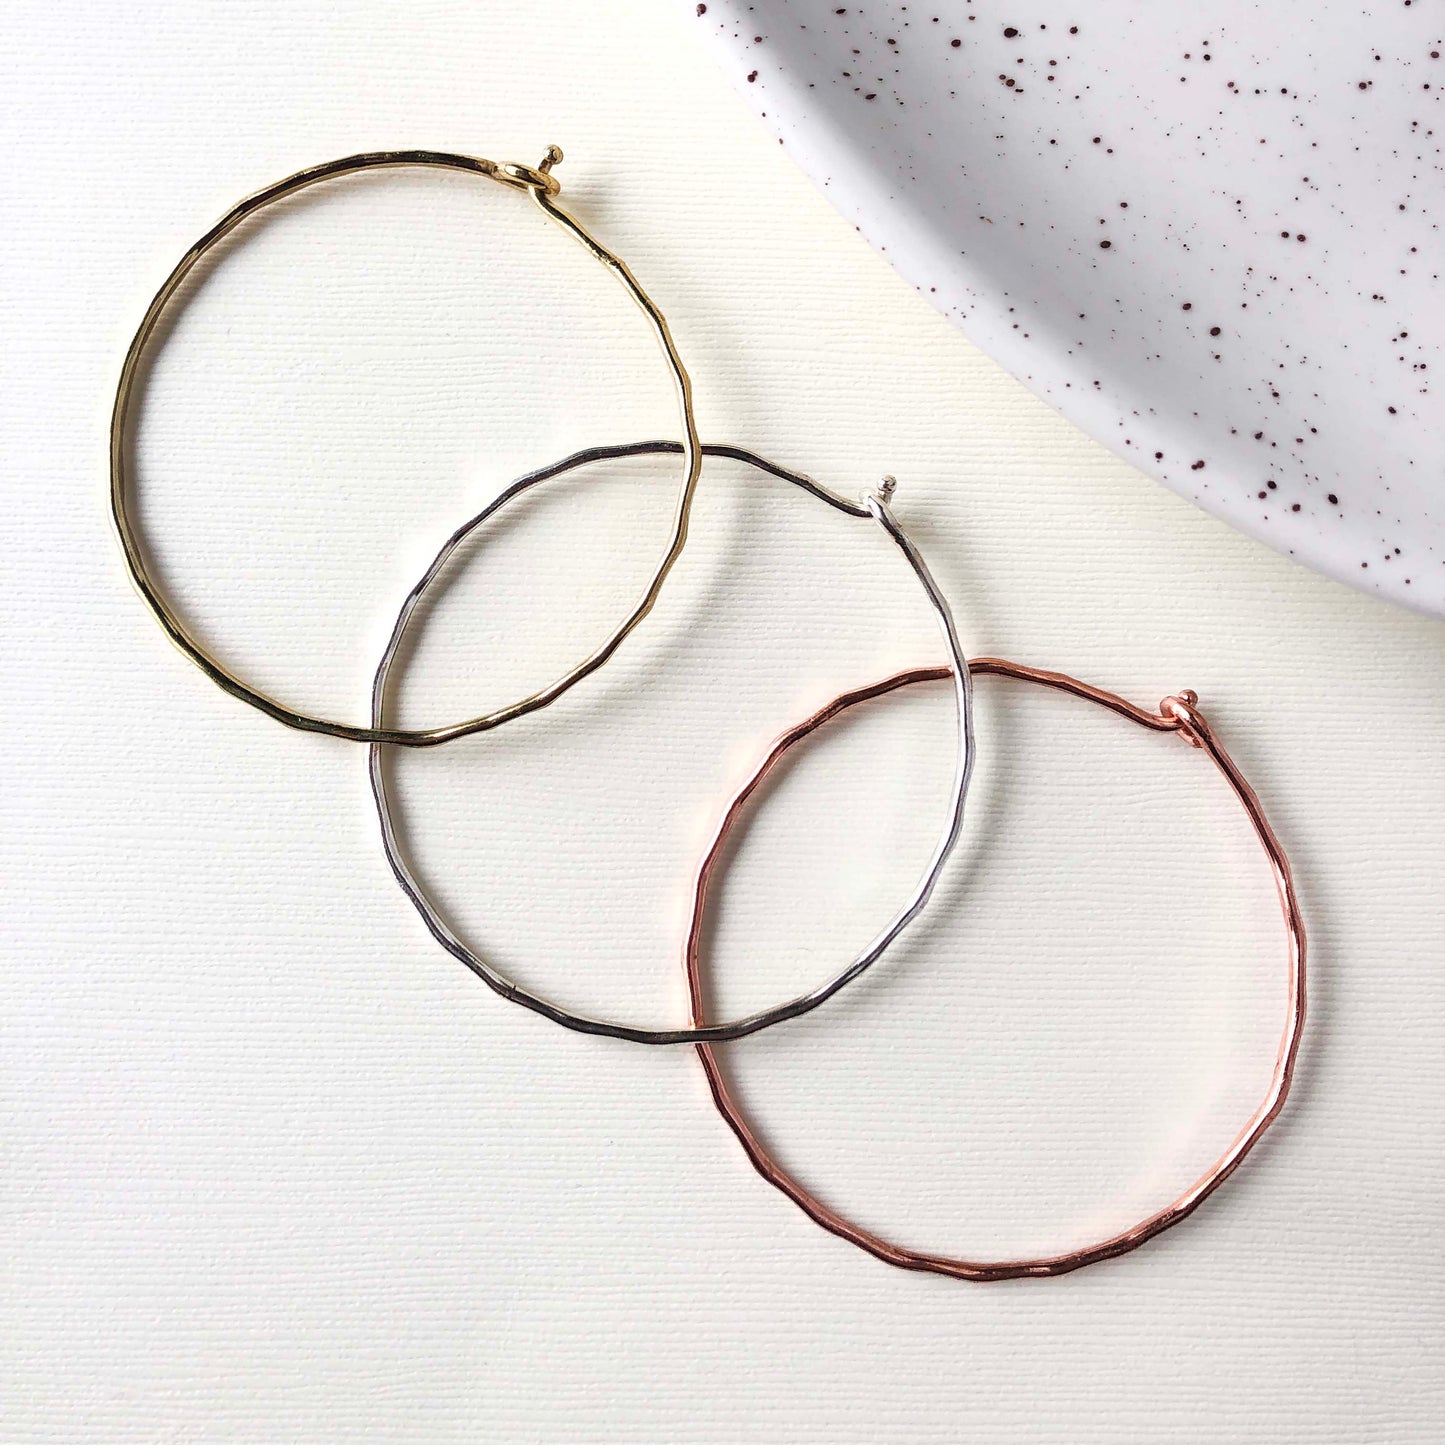 Product photo of the gold, silver, and copper “Interlocking Ripple” Bracelets, next to each other.